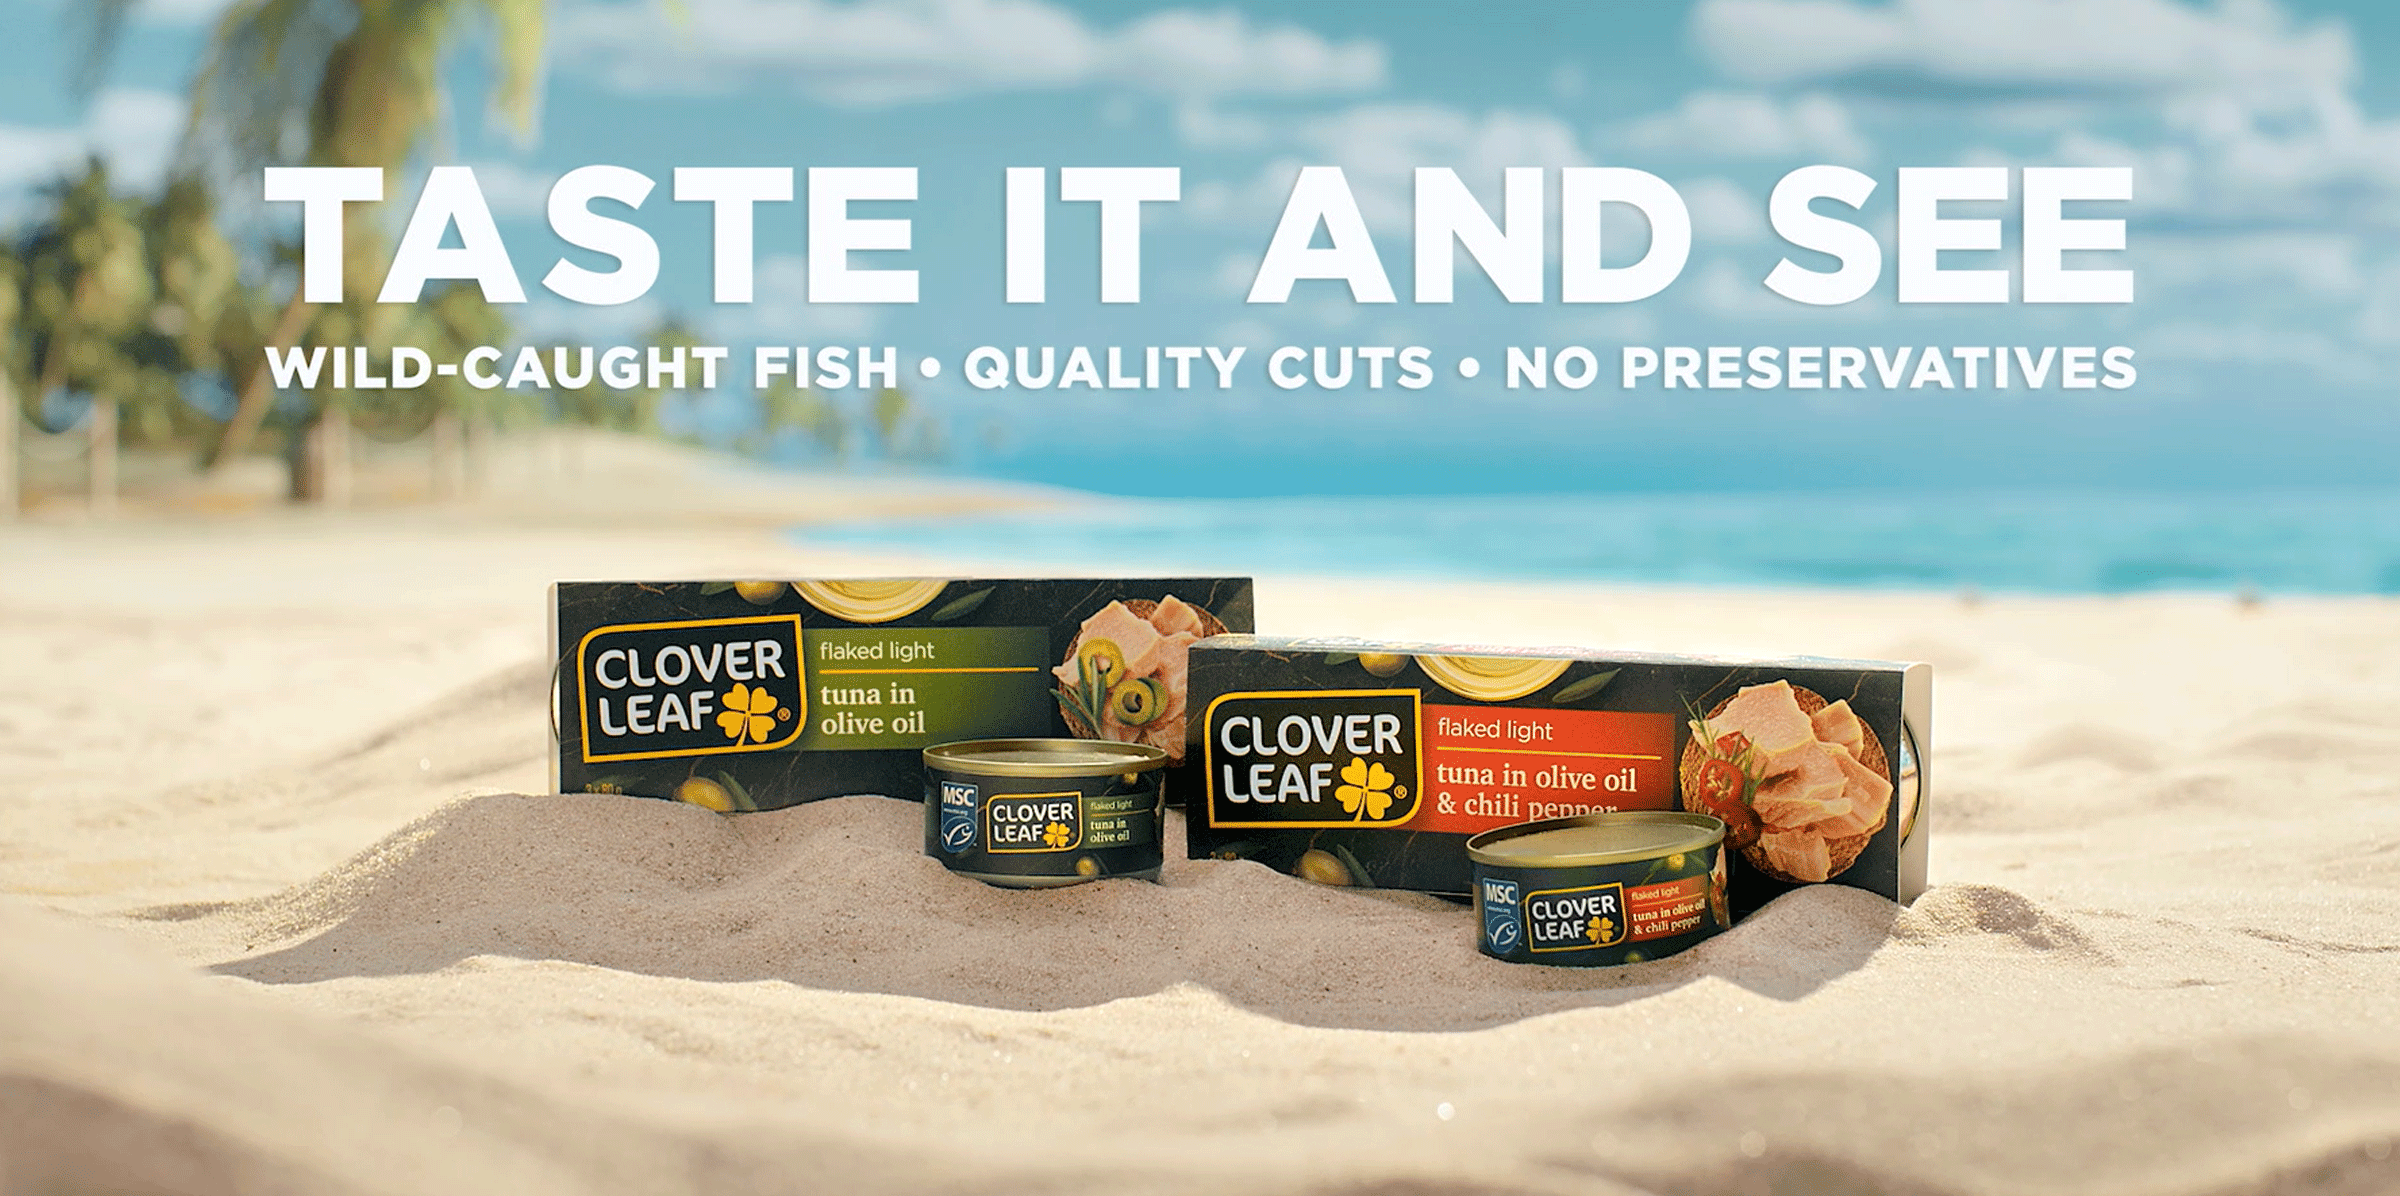 Clover Leaf's Flaked Light Tuna in Olive Oil - Taste It And See!